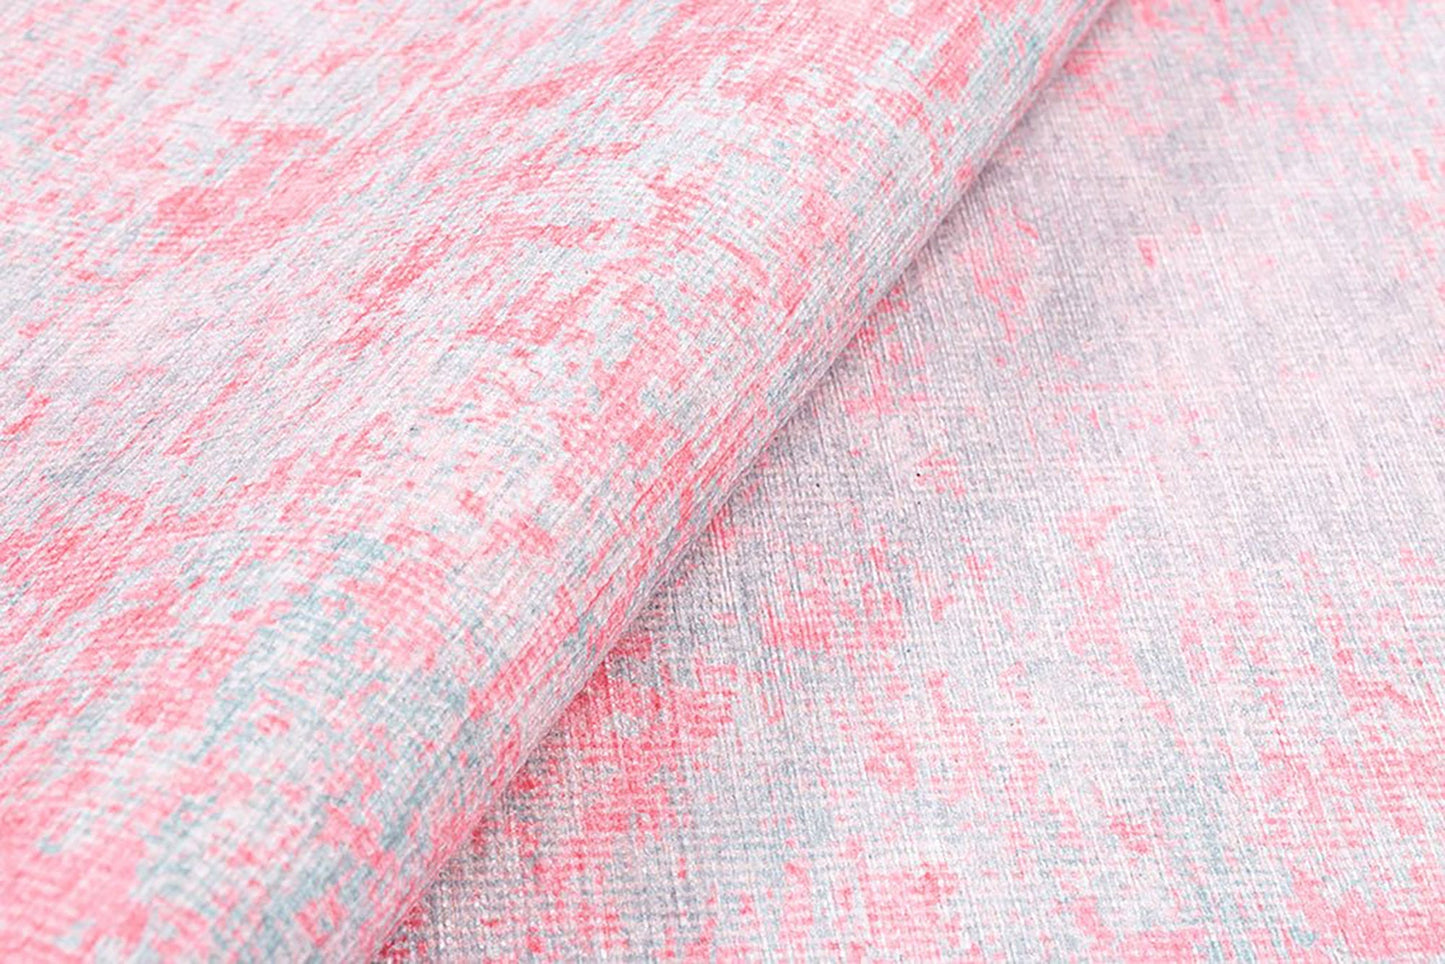 Rossa Abstract Pink Gray Rug